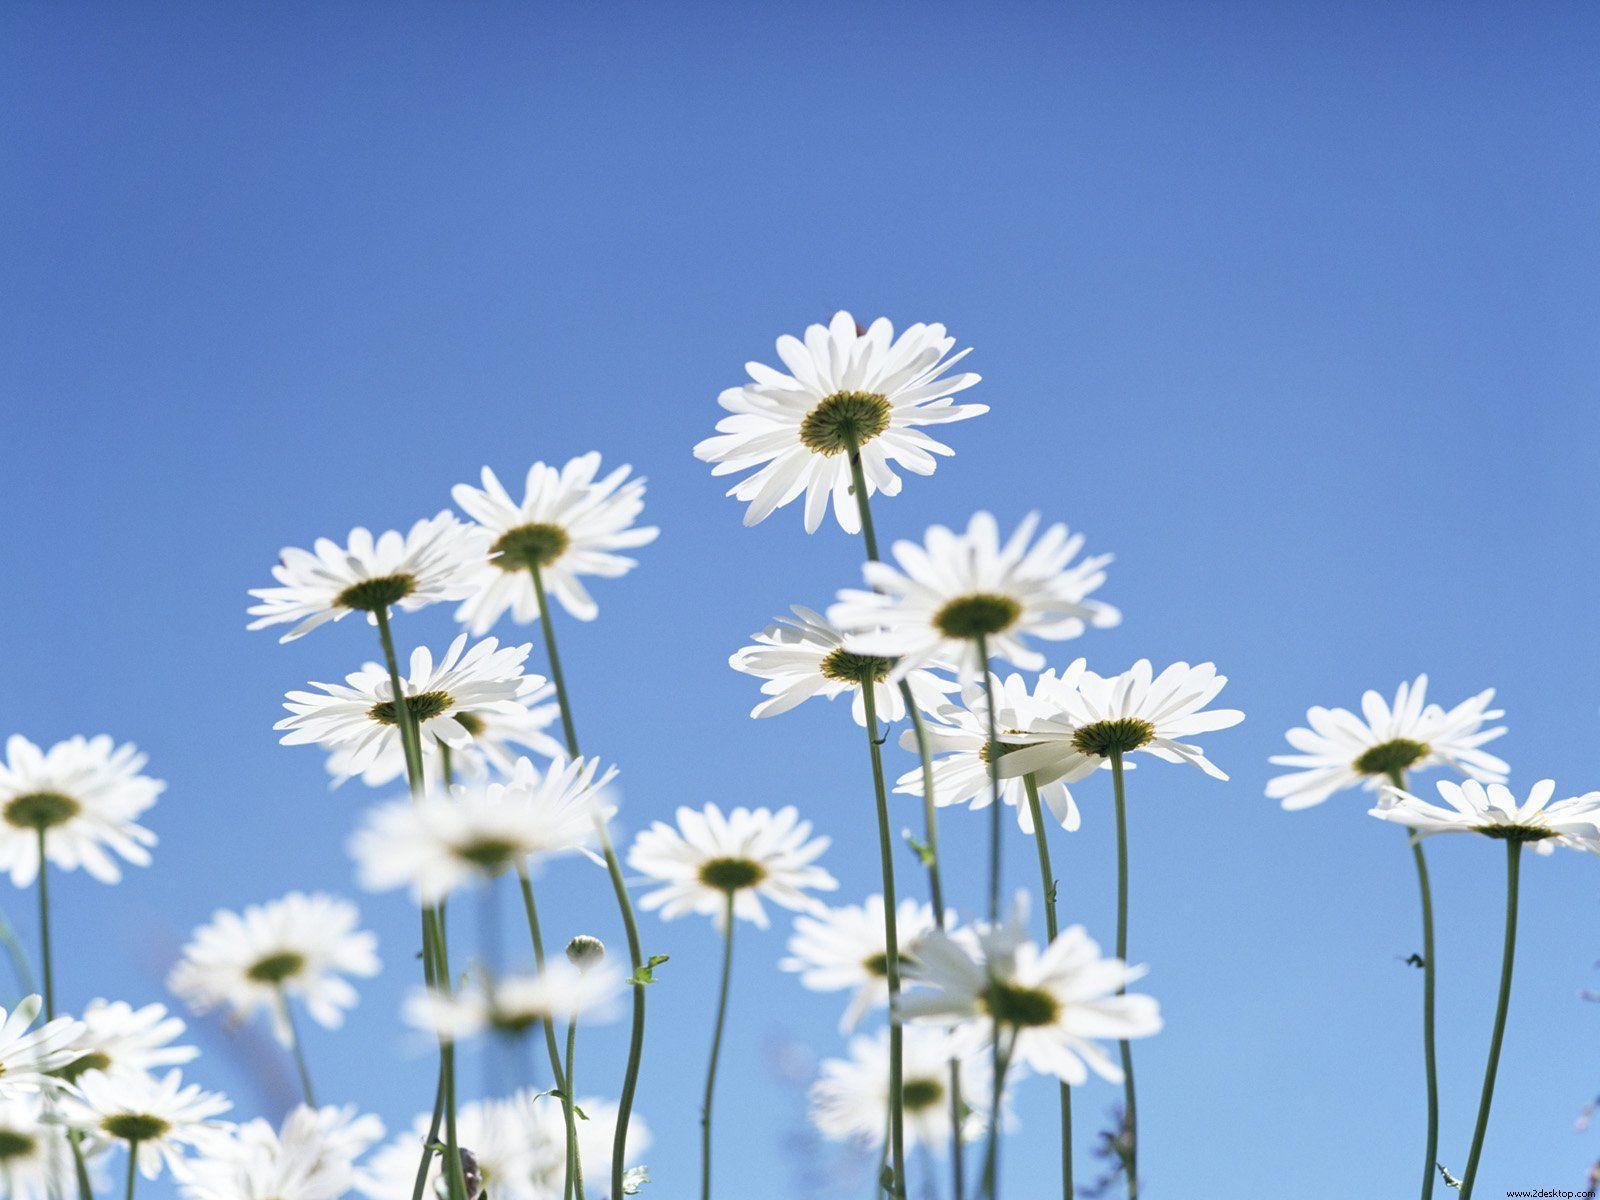 Wallpapers For > Daisy Iphone Wallpaper - Thailand Good Morning Friday , HD Wallpaper & Backgrounds